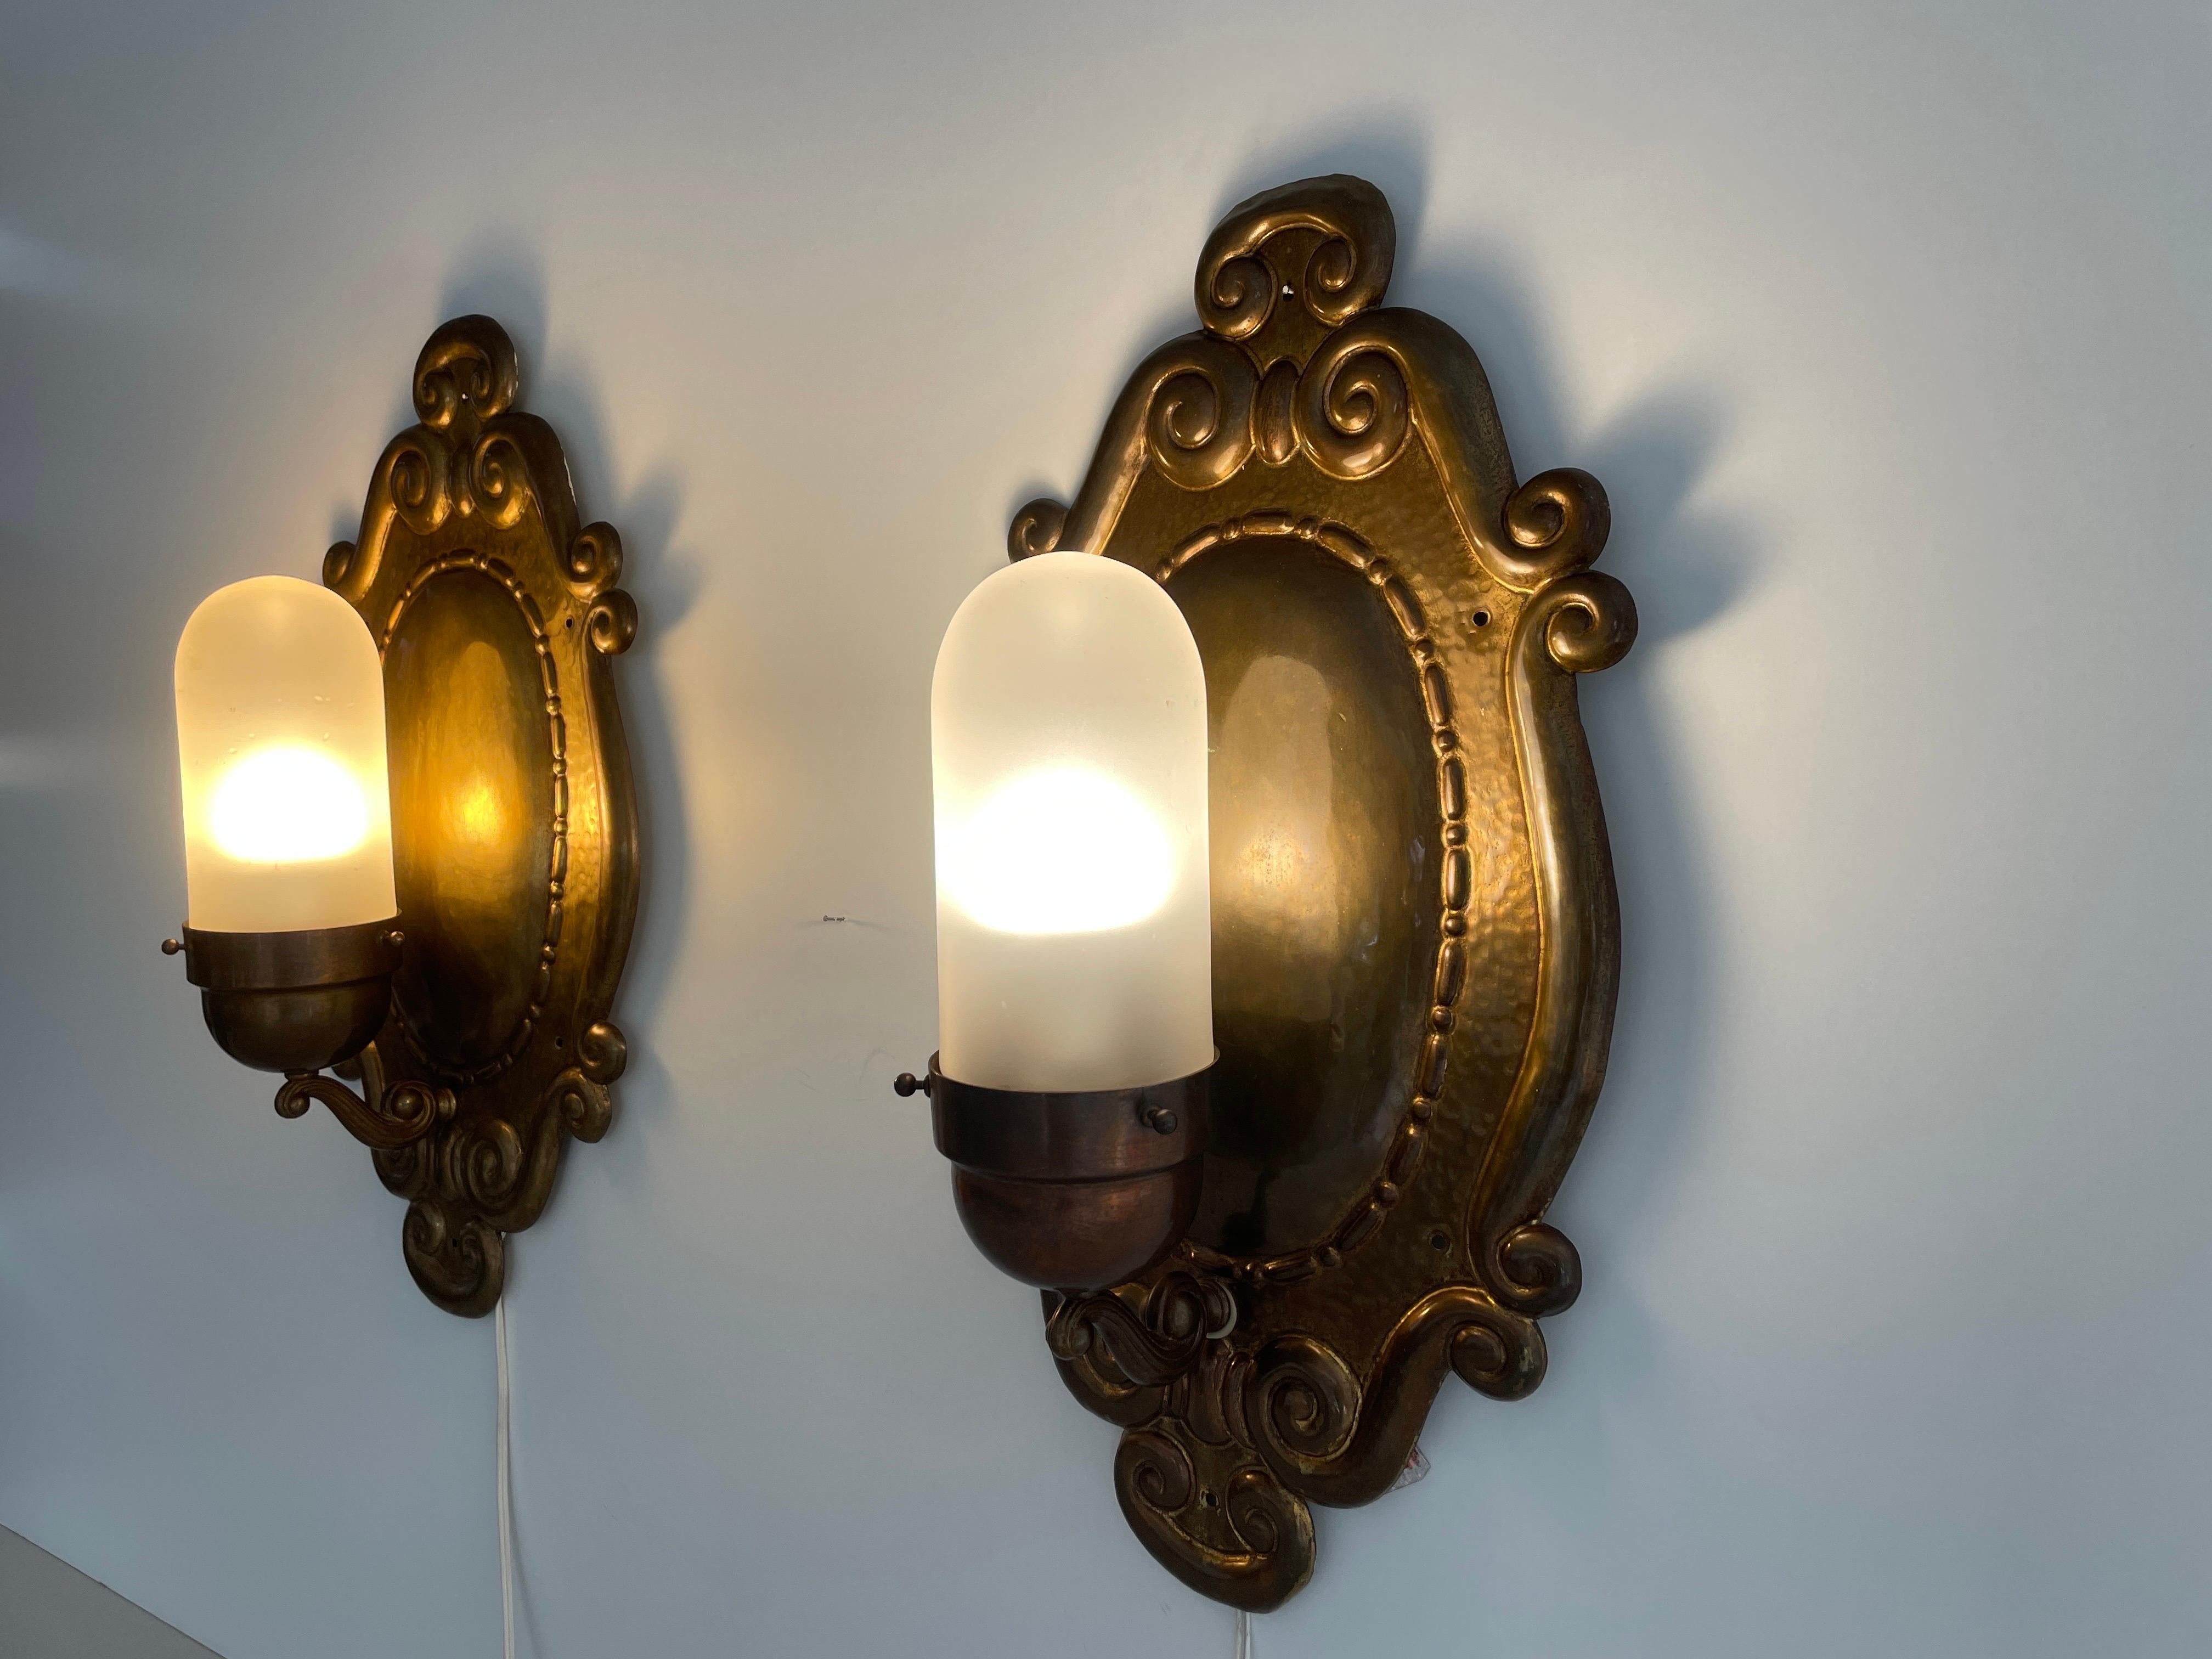 Exceptional Art Deco Glass and Copper Body Pair of Sconces, 1940s, Germany For Sale 6